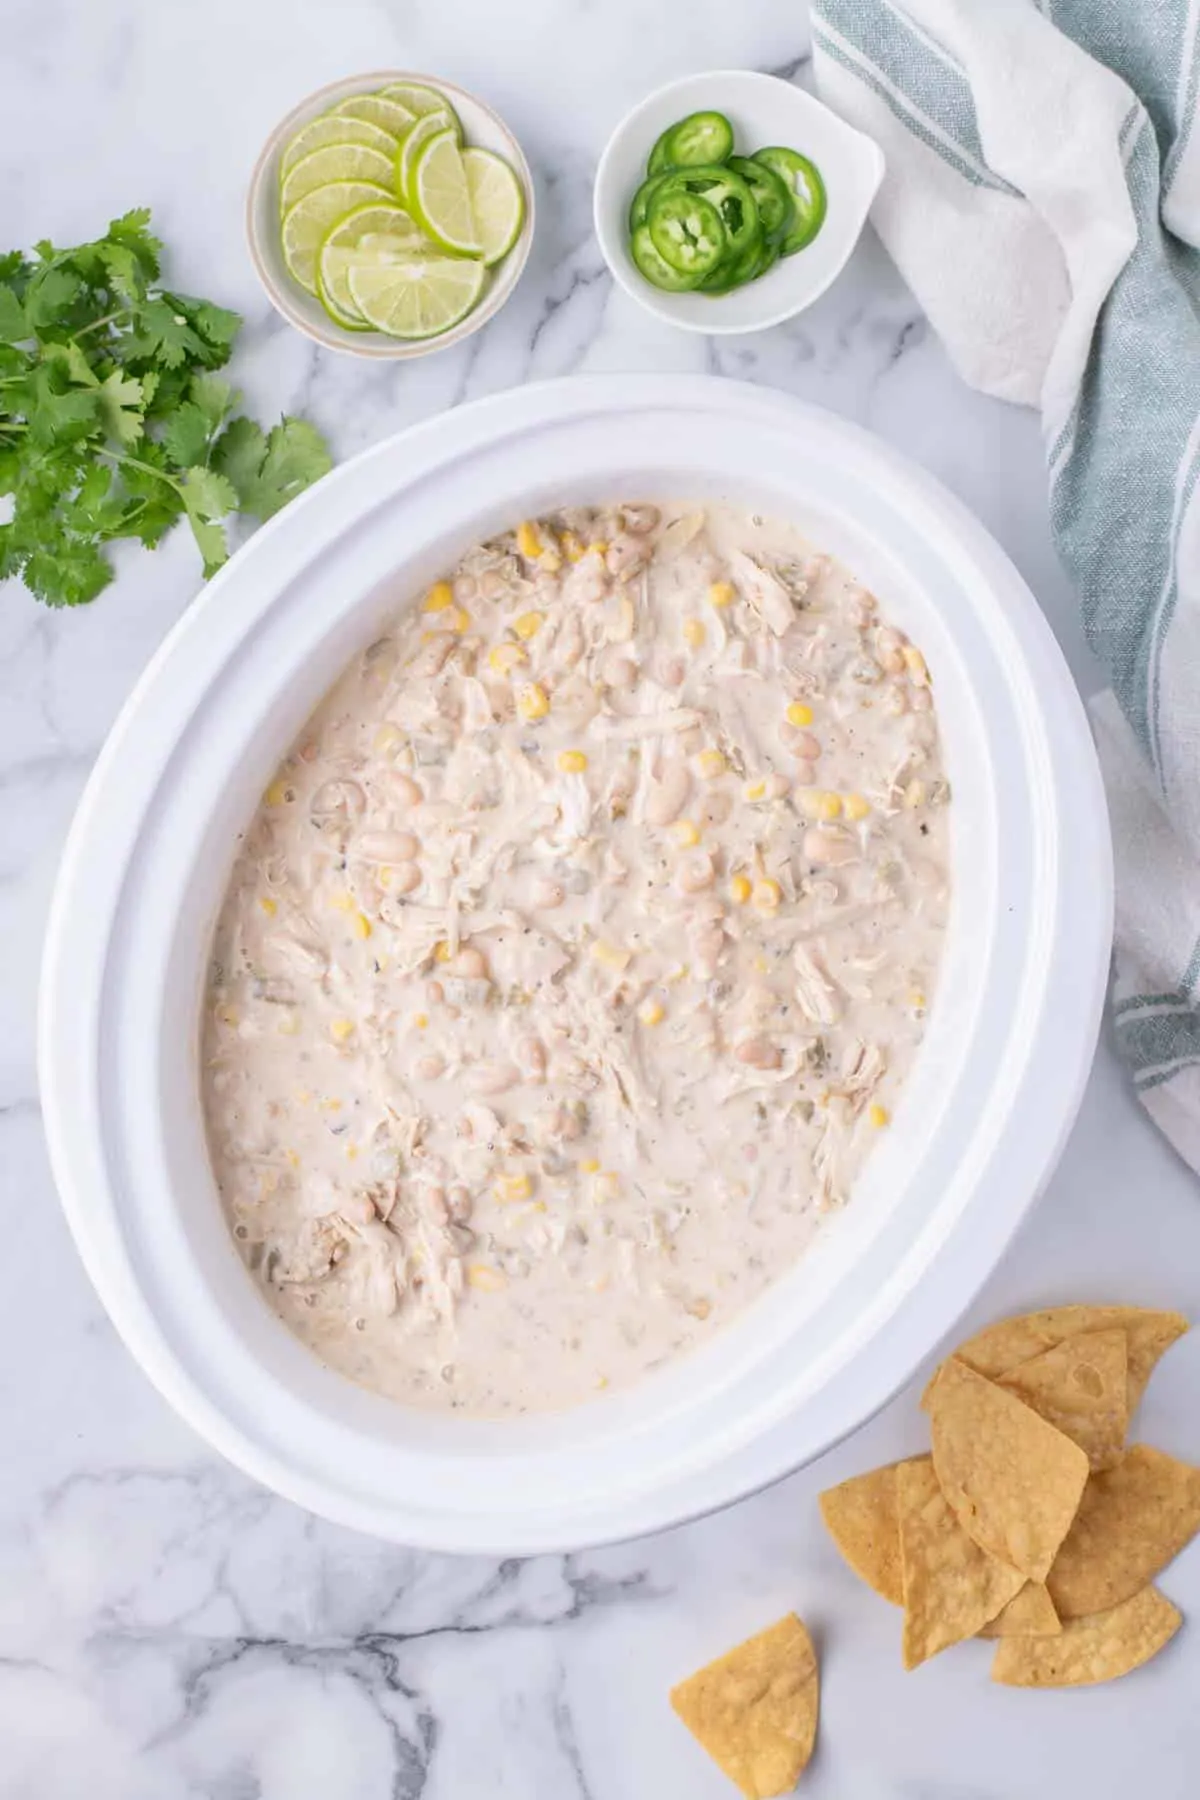 Crock Pot White Chicken Chili is a hearty slow cooker dinner recipe loaded with navy beans, chicken thighs, green chiles, corn, onions and spices.